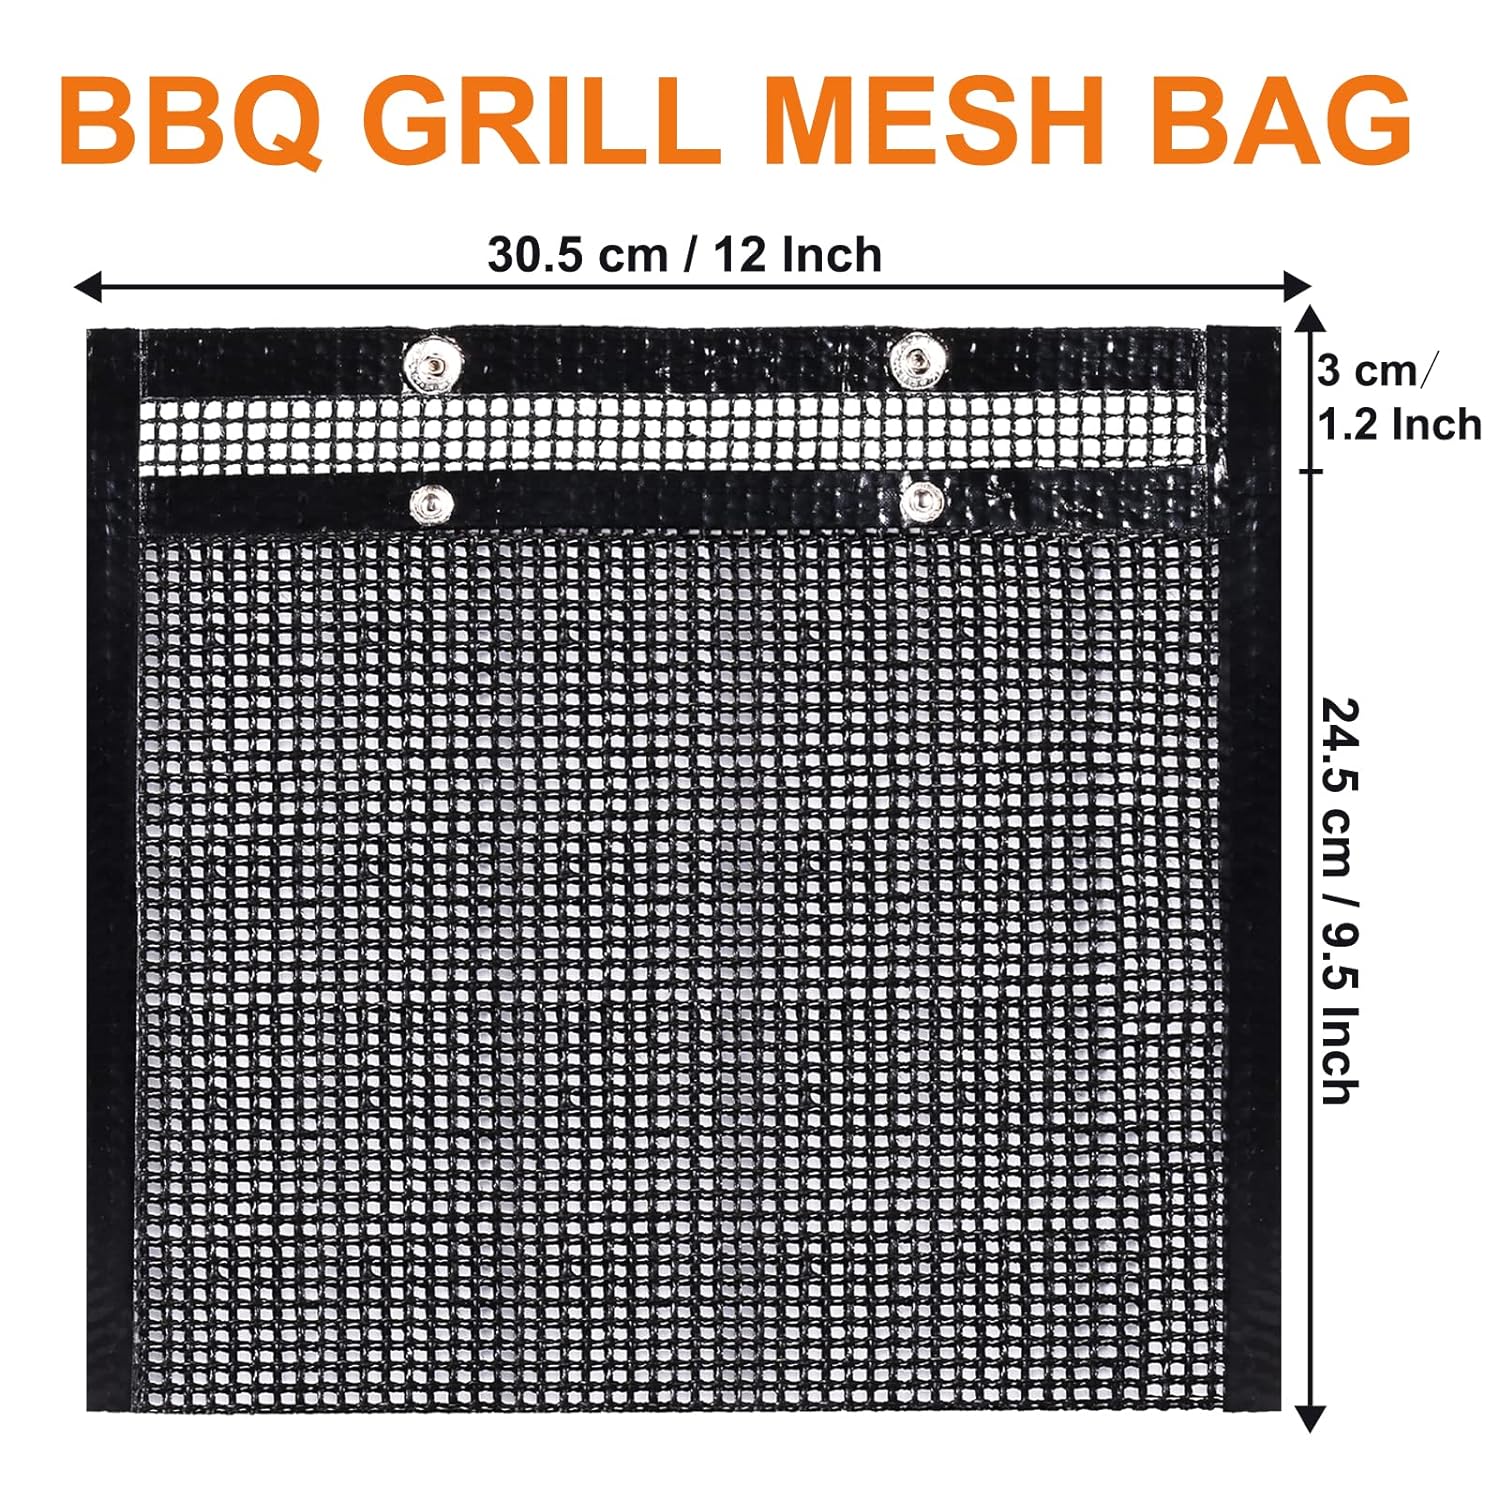 thinkstar Bbq Mesh Grill Bags For Outdoor Grill Reusable, 3 Pack Non-Stick Barbecue Bags For Charcoal Gas Electric Grills Smokers Bb…